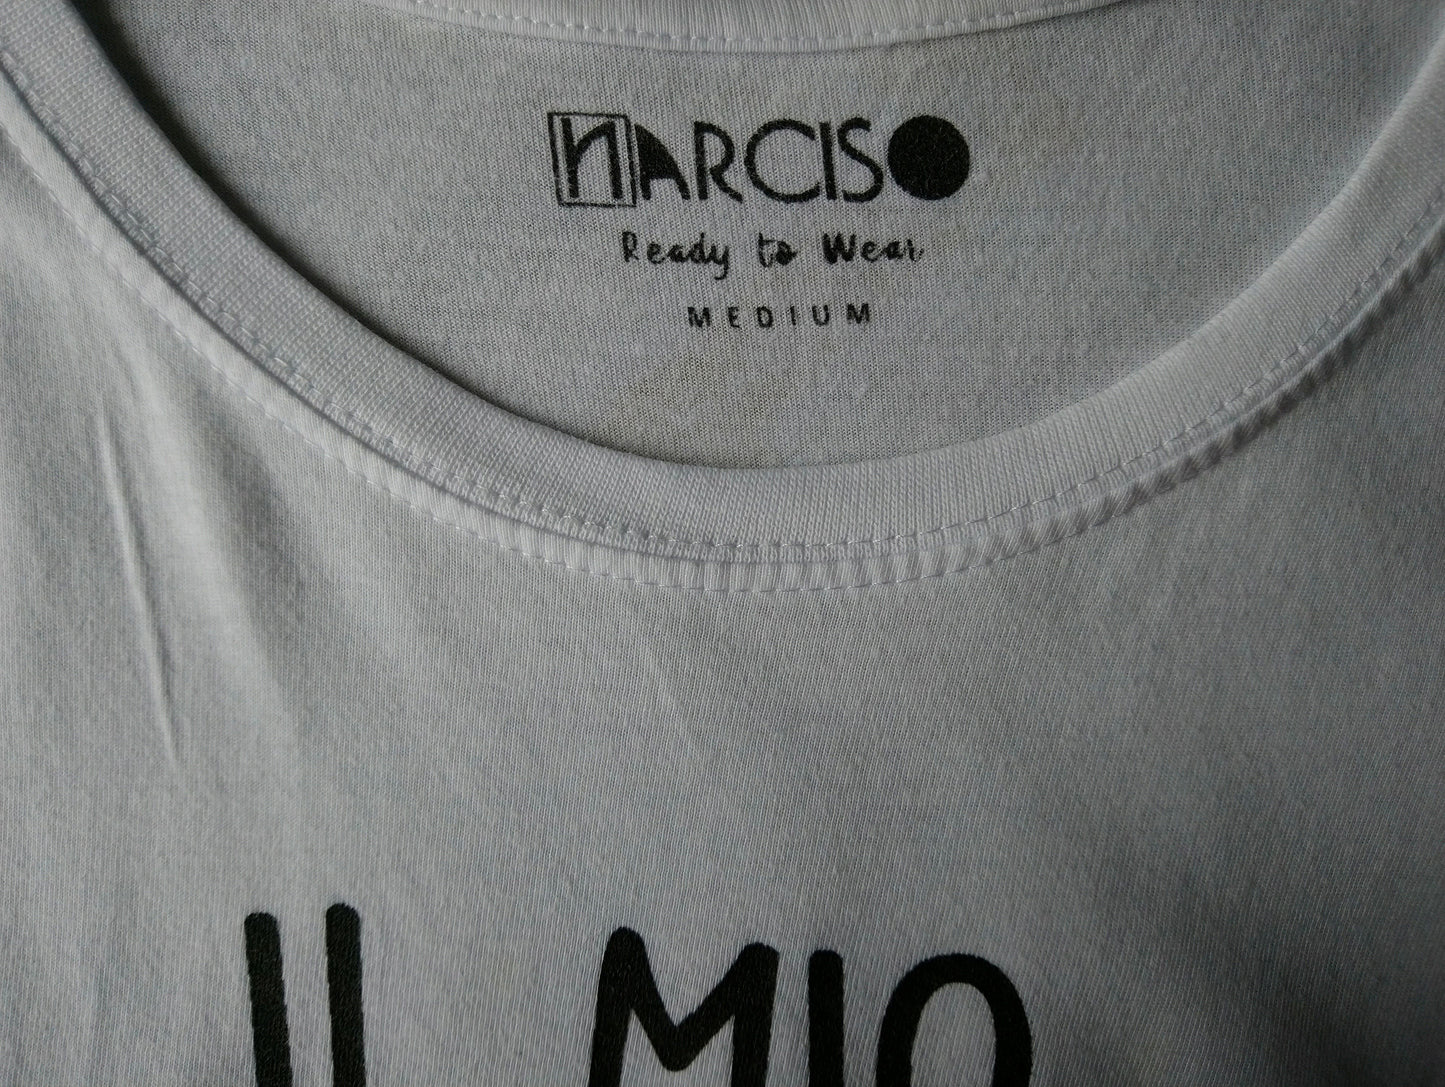 Narciso Ready to Wear shirt. White with print. Size M.